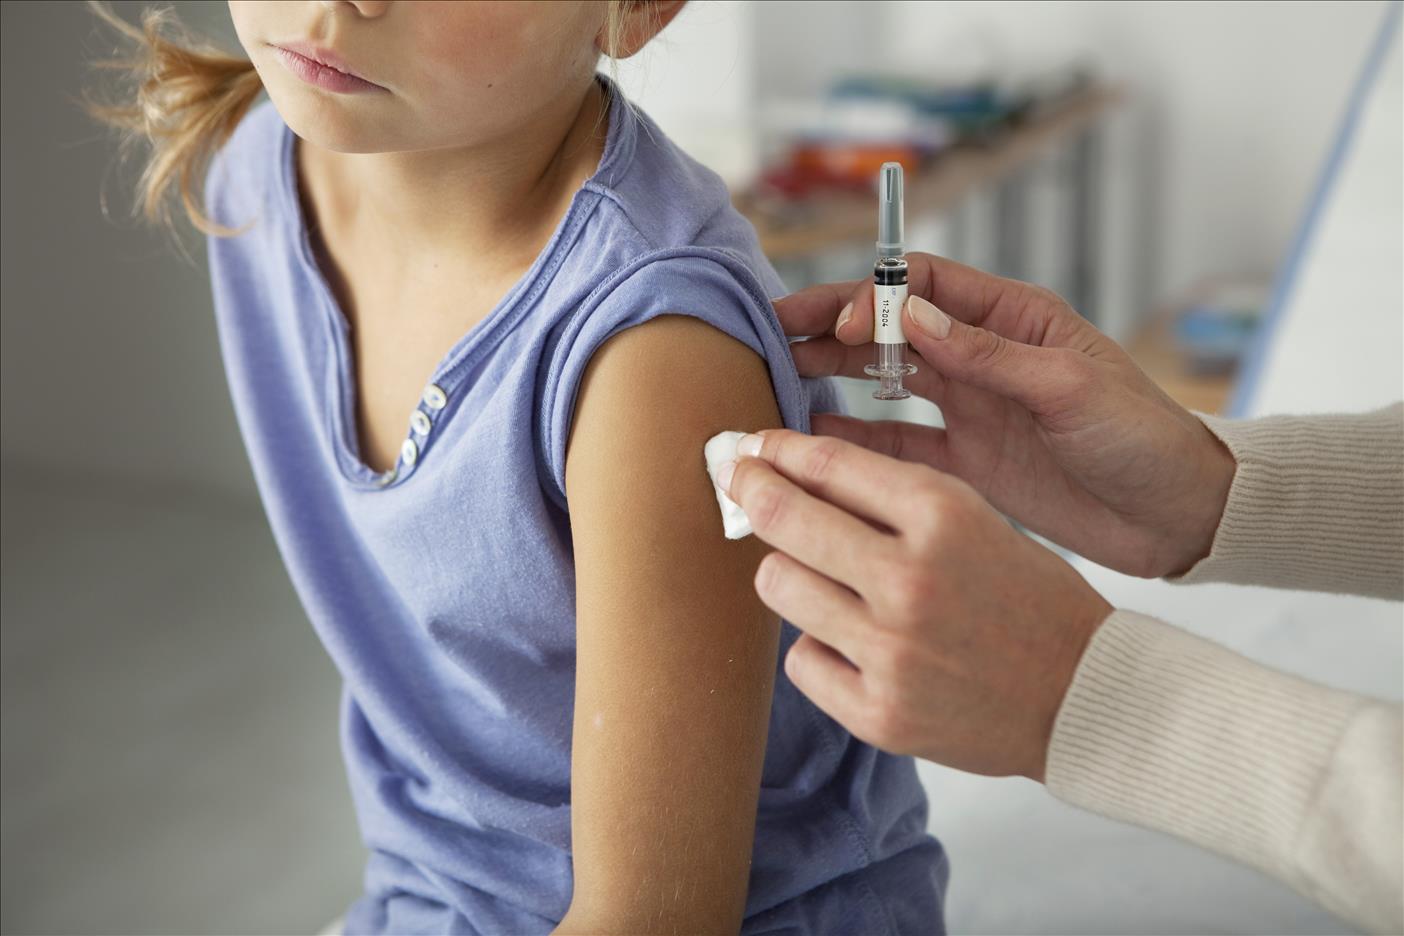 Is your child frightened of needles? Here's how to prepare them for their COVID vaccine